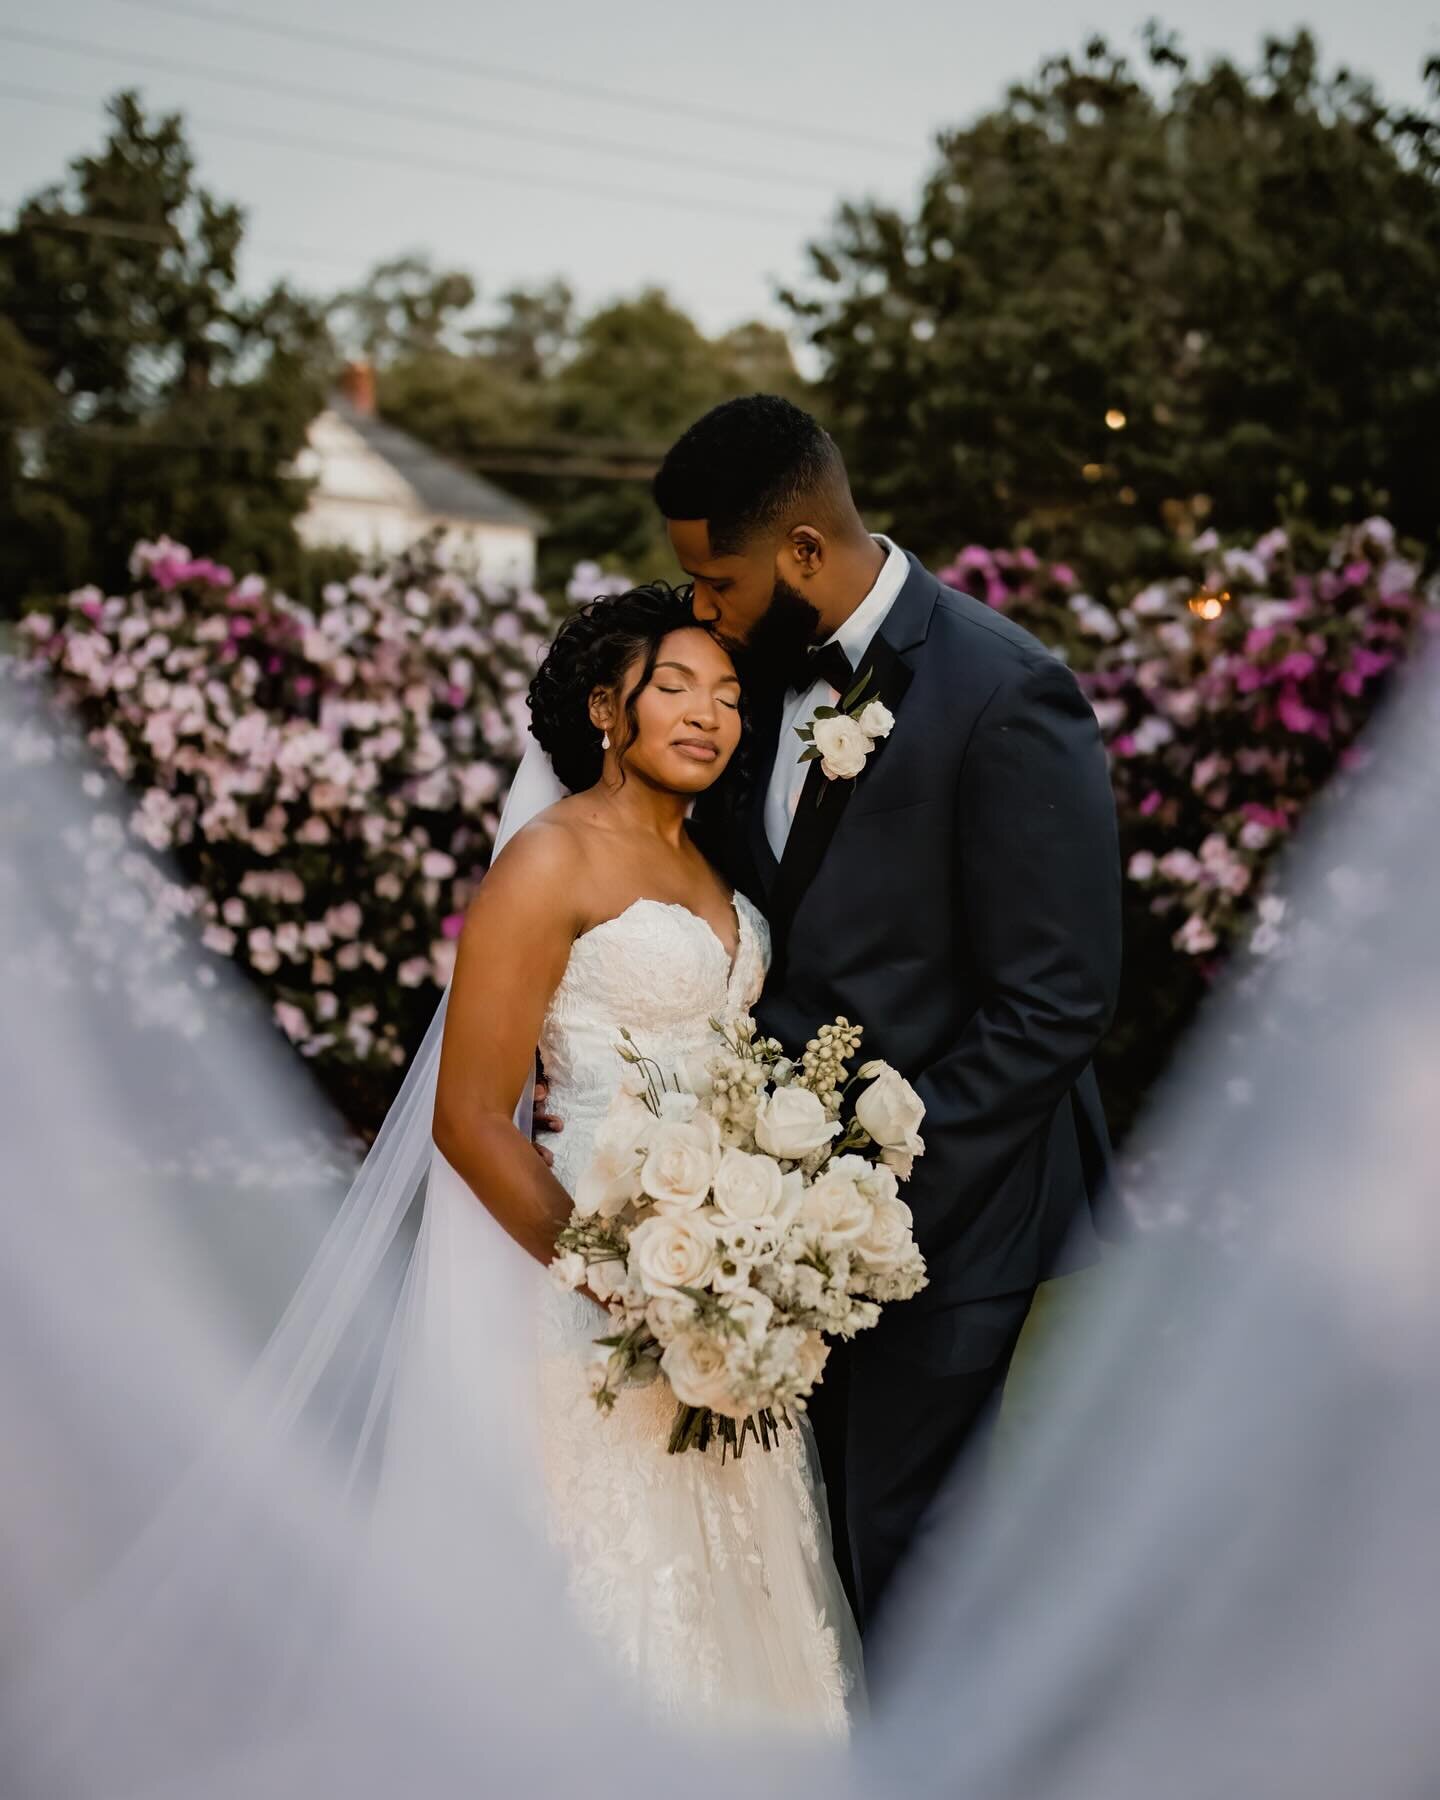 Love blooms in every corner at Primrose Cottage! 🌸 Celebrate your special day surrounded by the vibrant beauty of Roswell, GA, and the timeless elegance of our all-inclusive venue. Spring weddings are simply magical here! 

Photo: @andreslopezfilms
